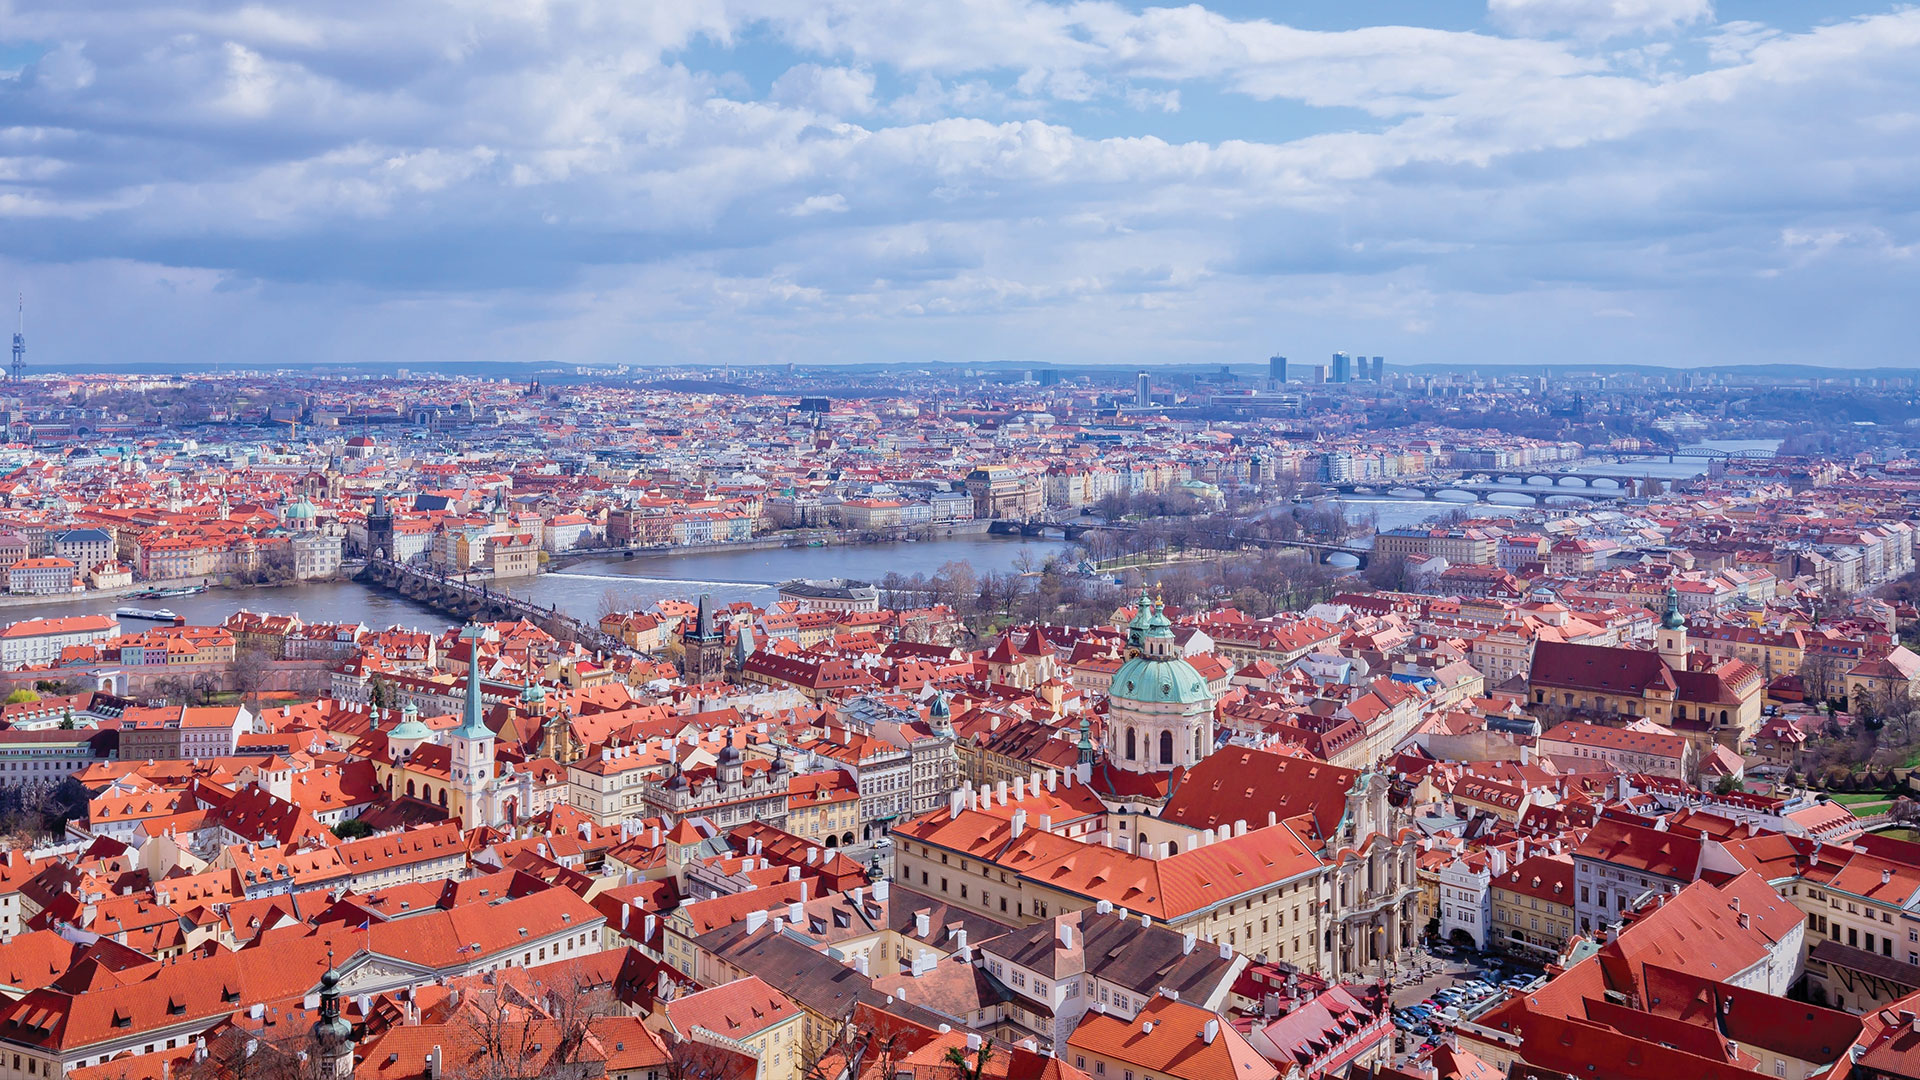 Bohemia Rhapsodies: The ancient spires of Prague nod to a city steeped in history and charm